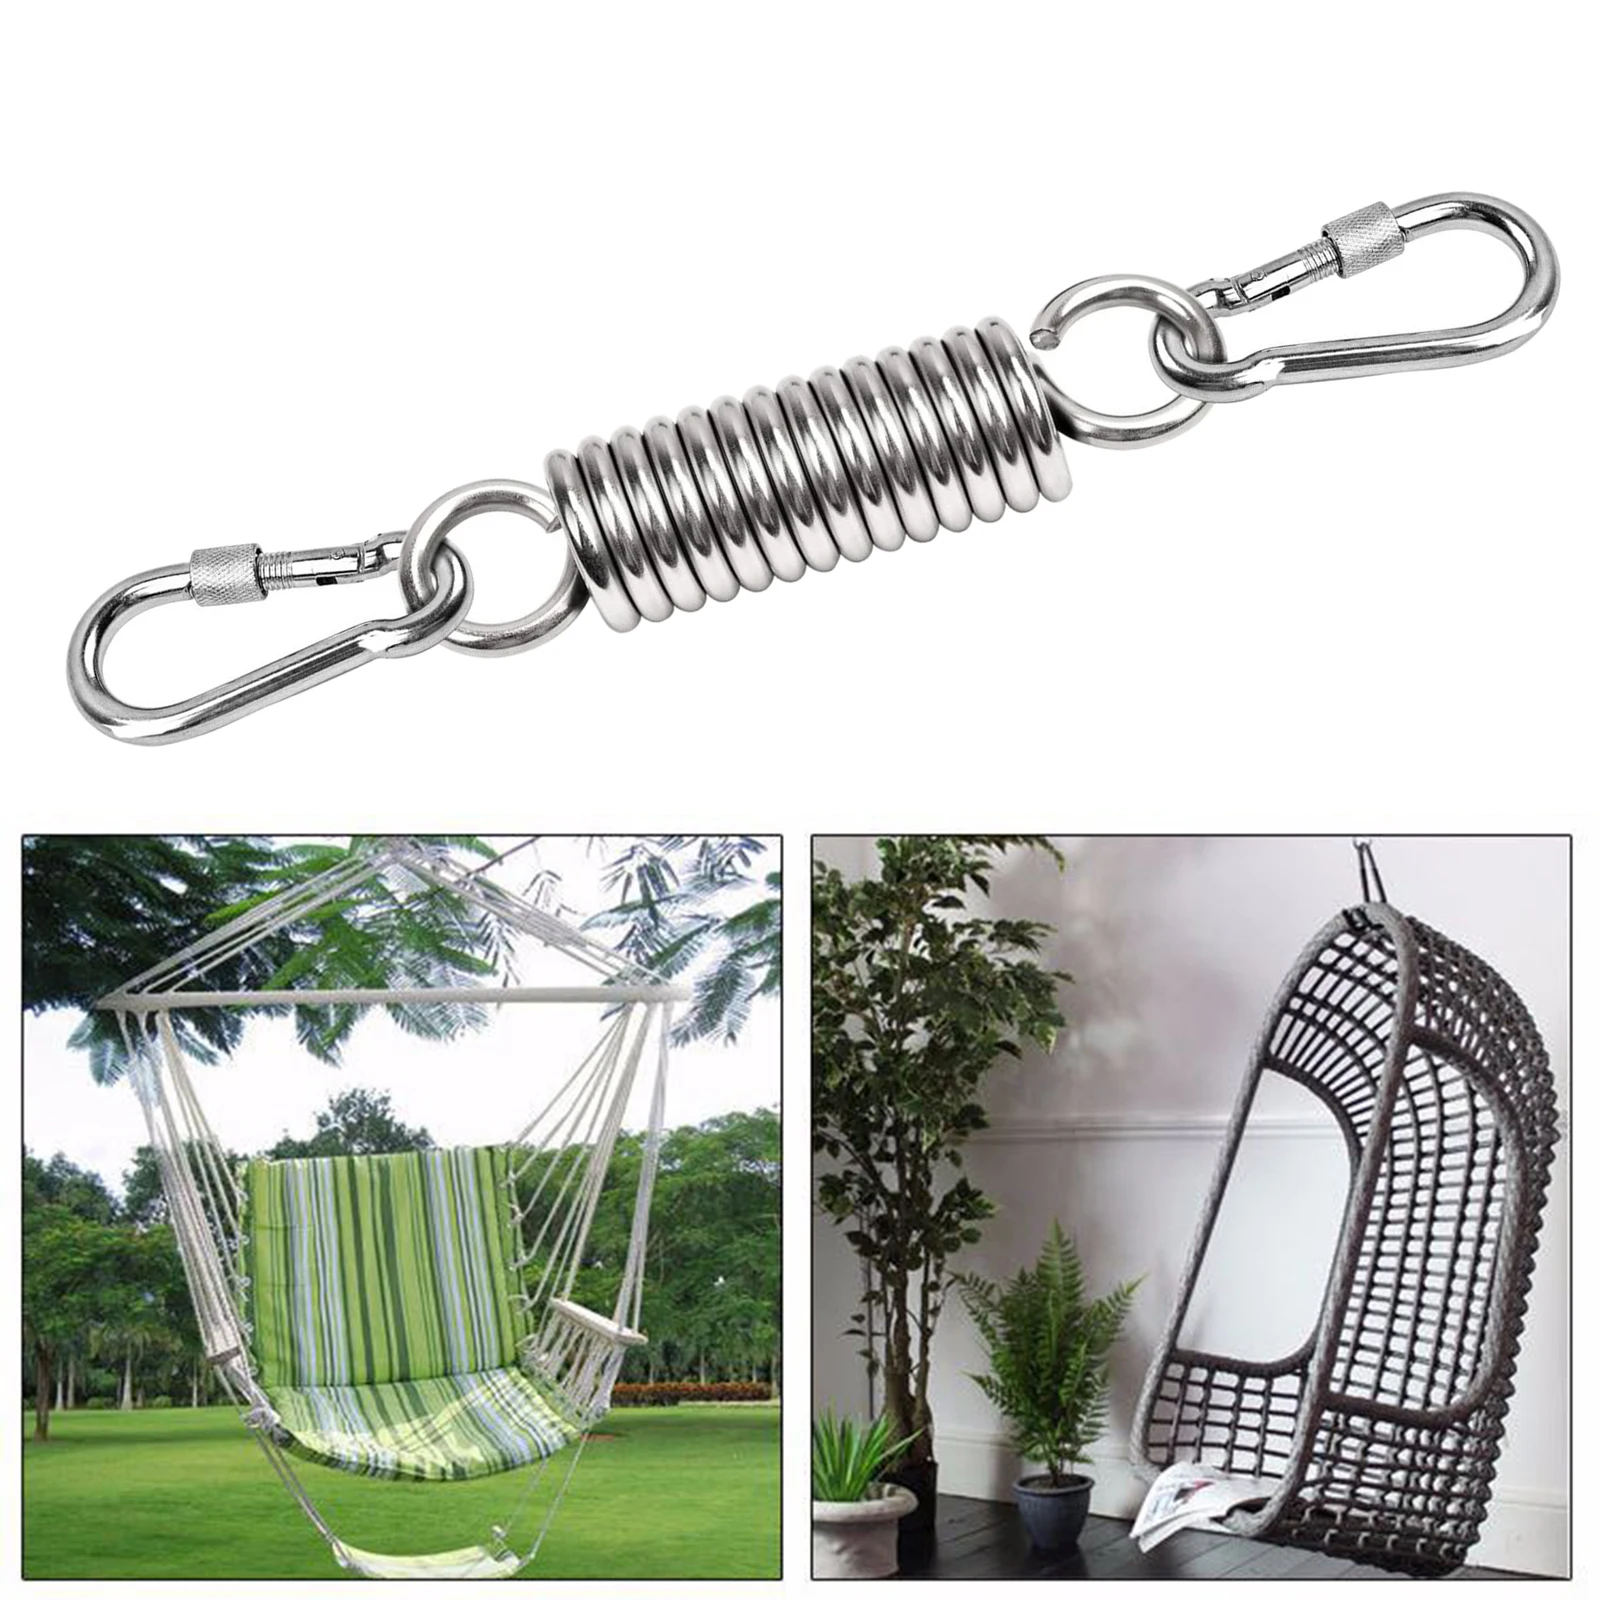 Porch Suspension Hammock Chair Spring with 2 Carabiner Hooks 500 LB Capacity